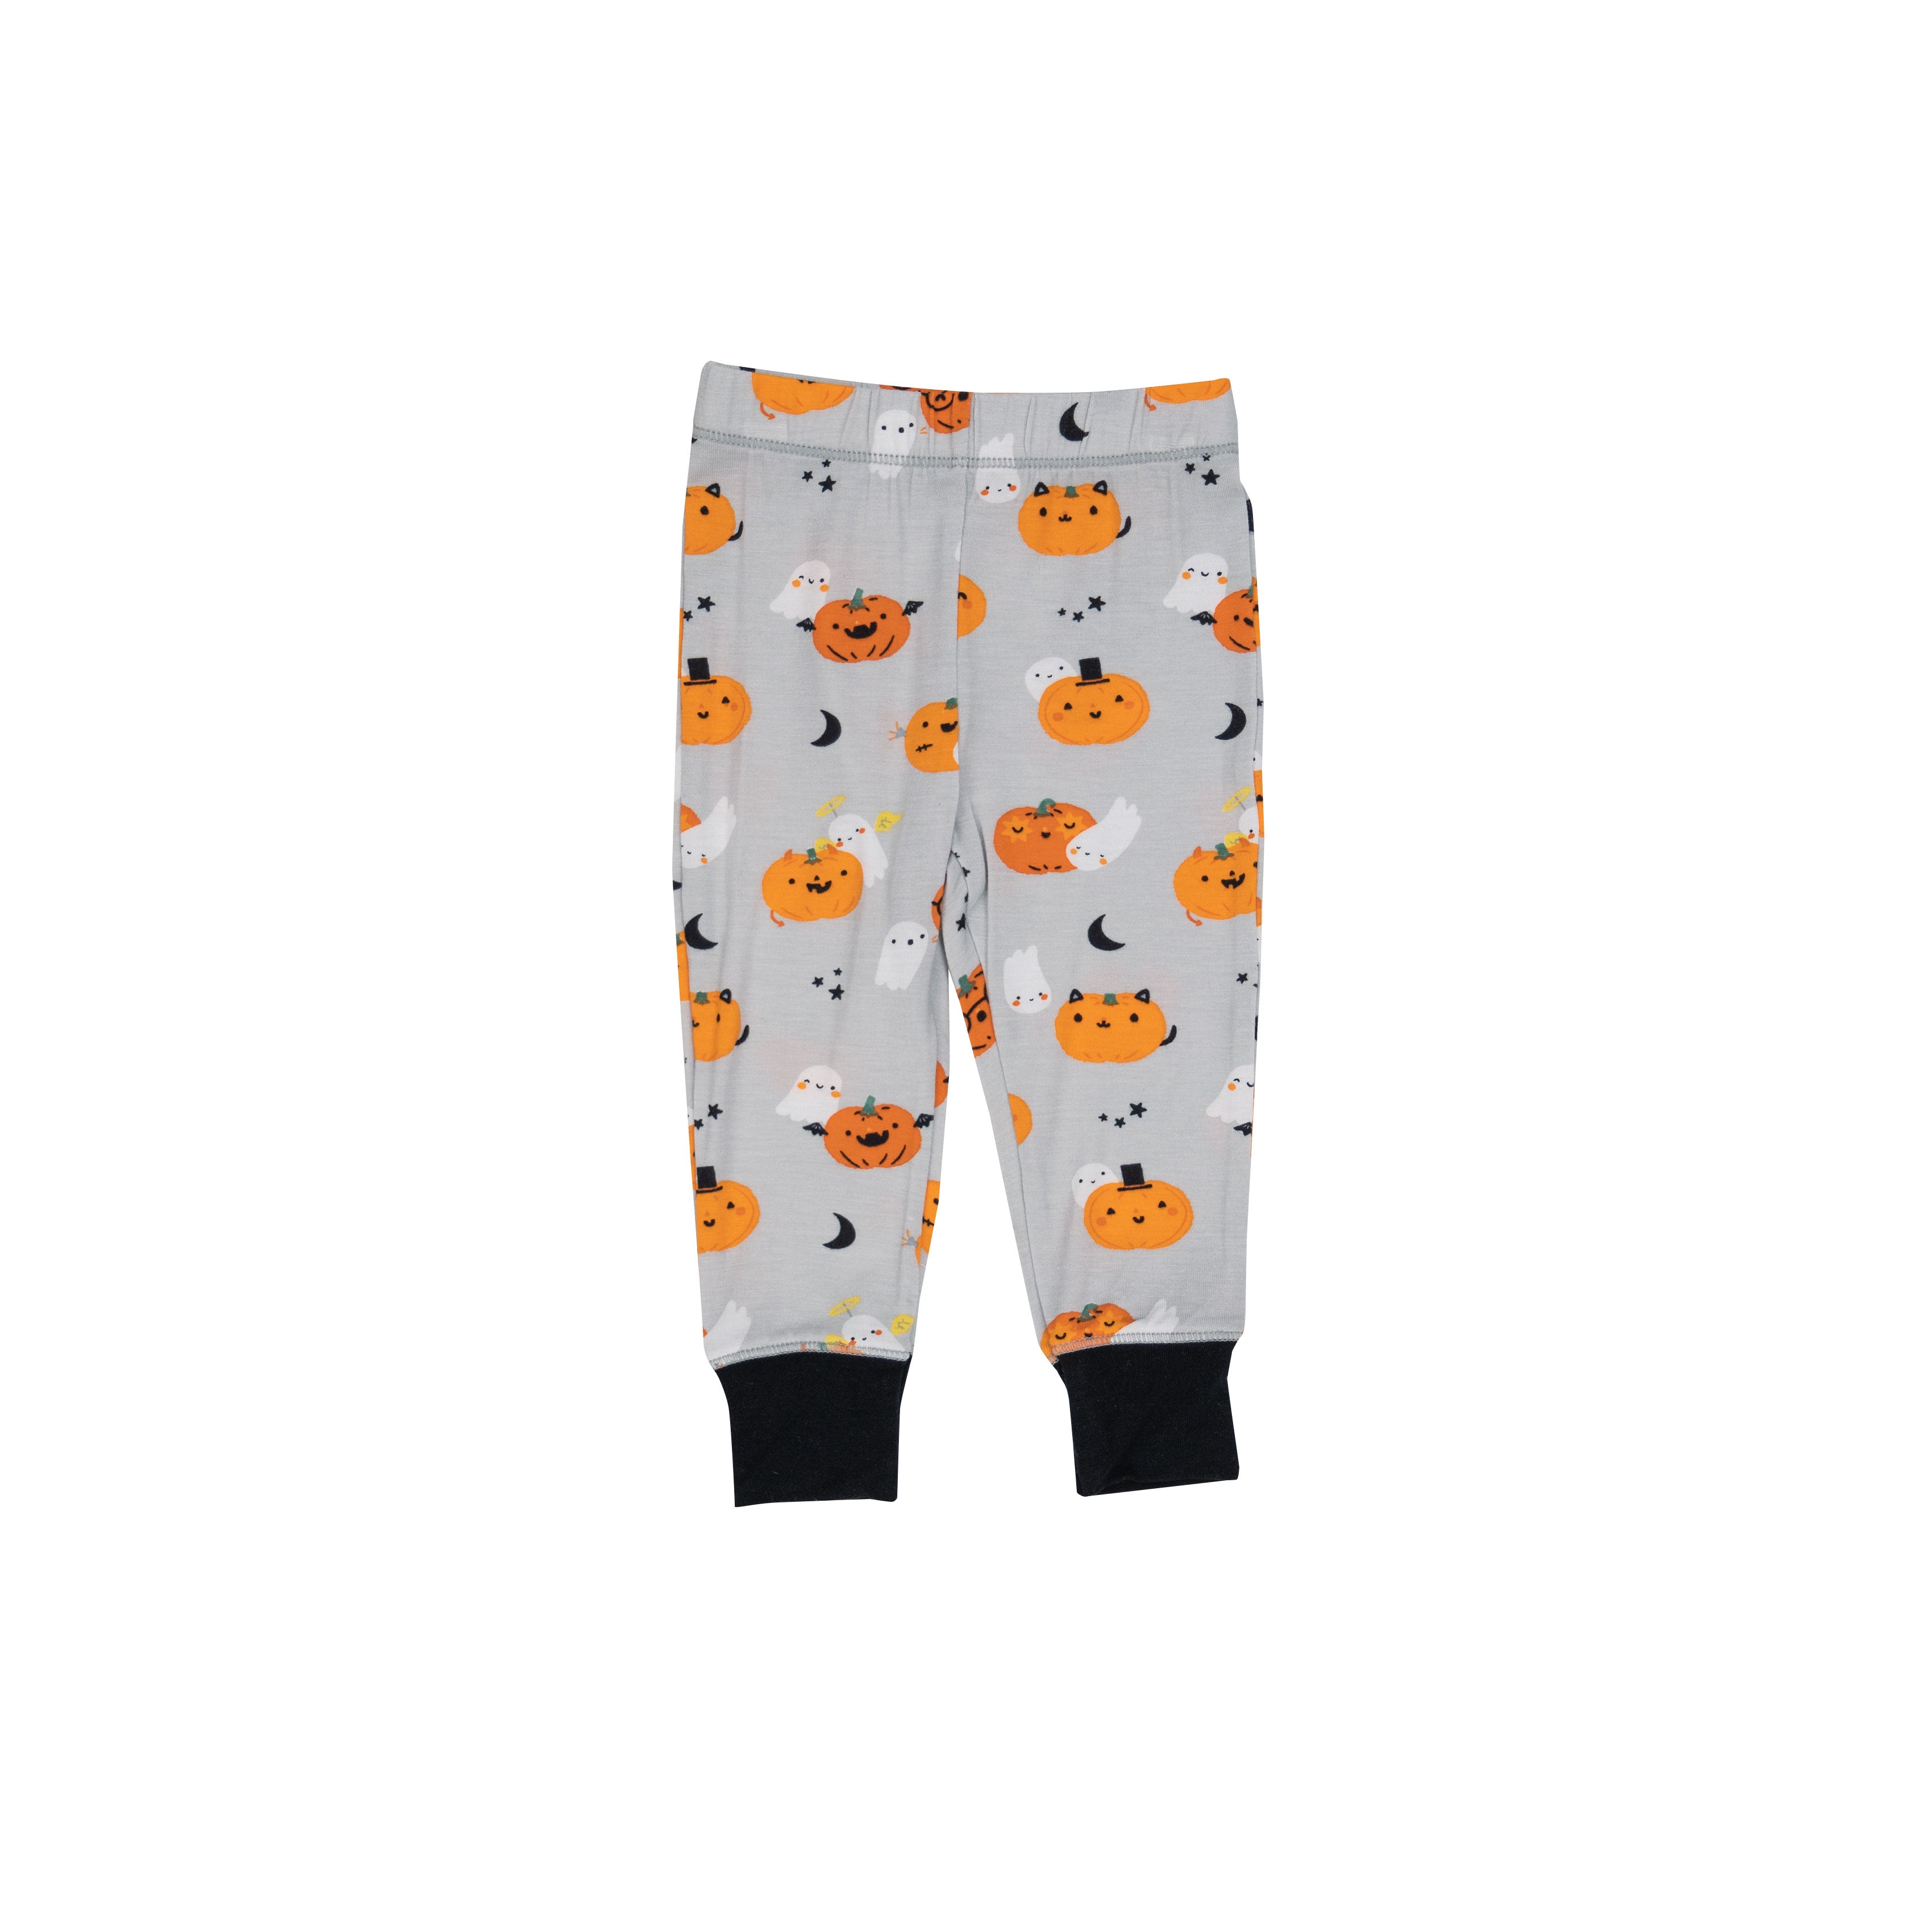 gray lounge pants with ghosts and orange pumpkin print with black on the ankles 